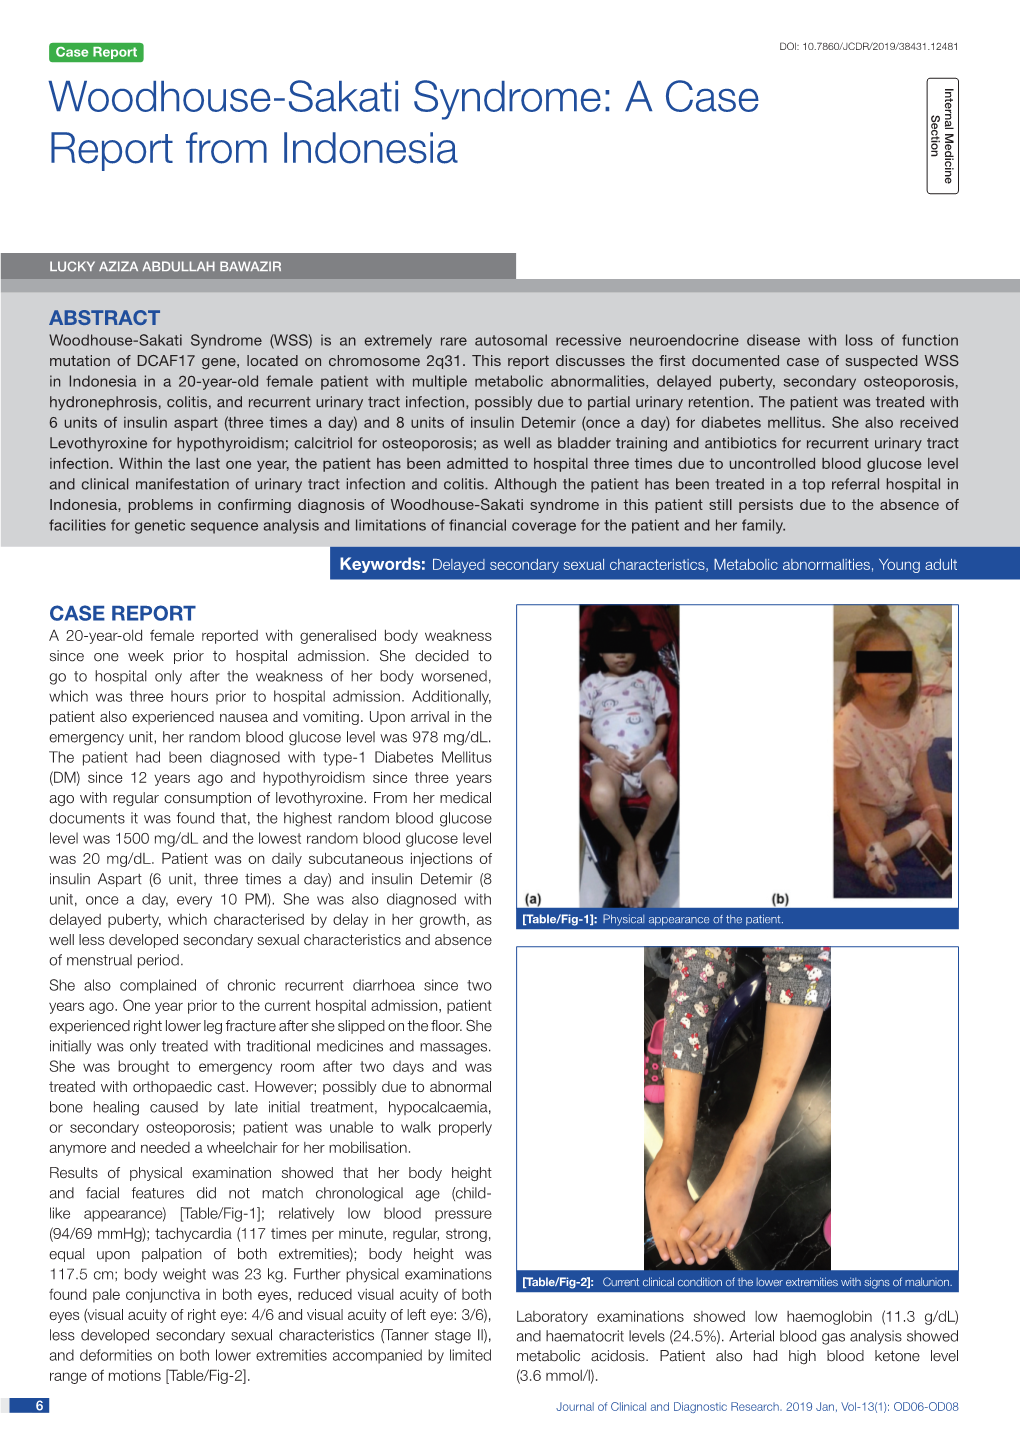 Woodhouse-Sakati Syndrome: a Case Report from Indonesia